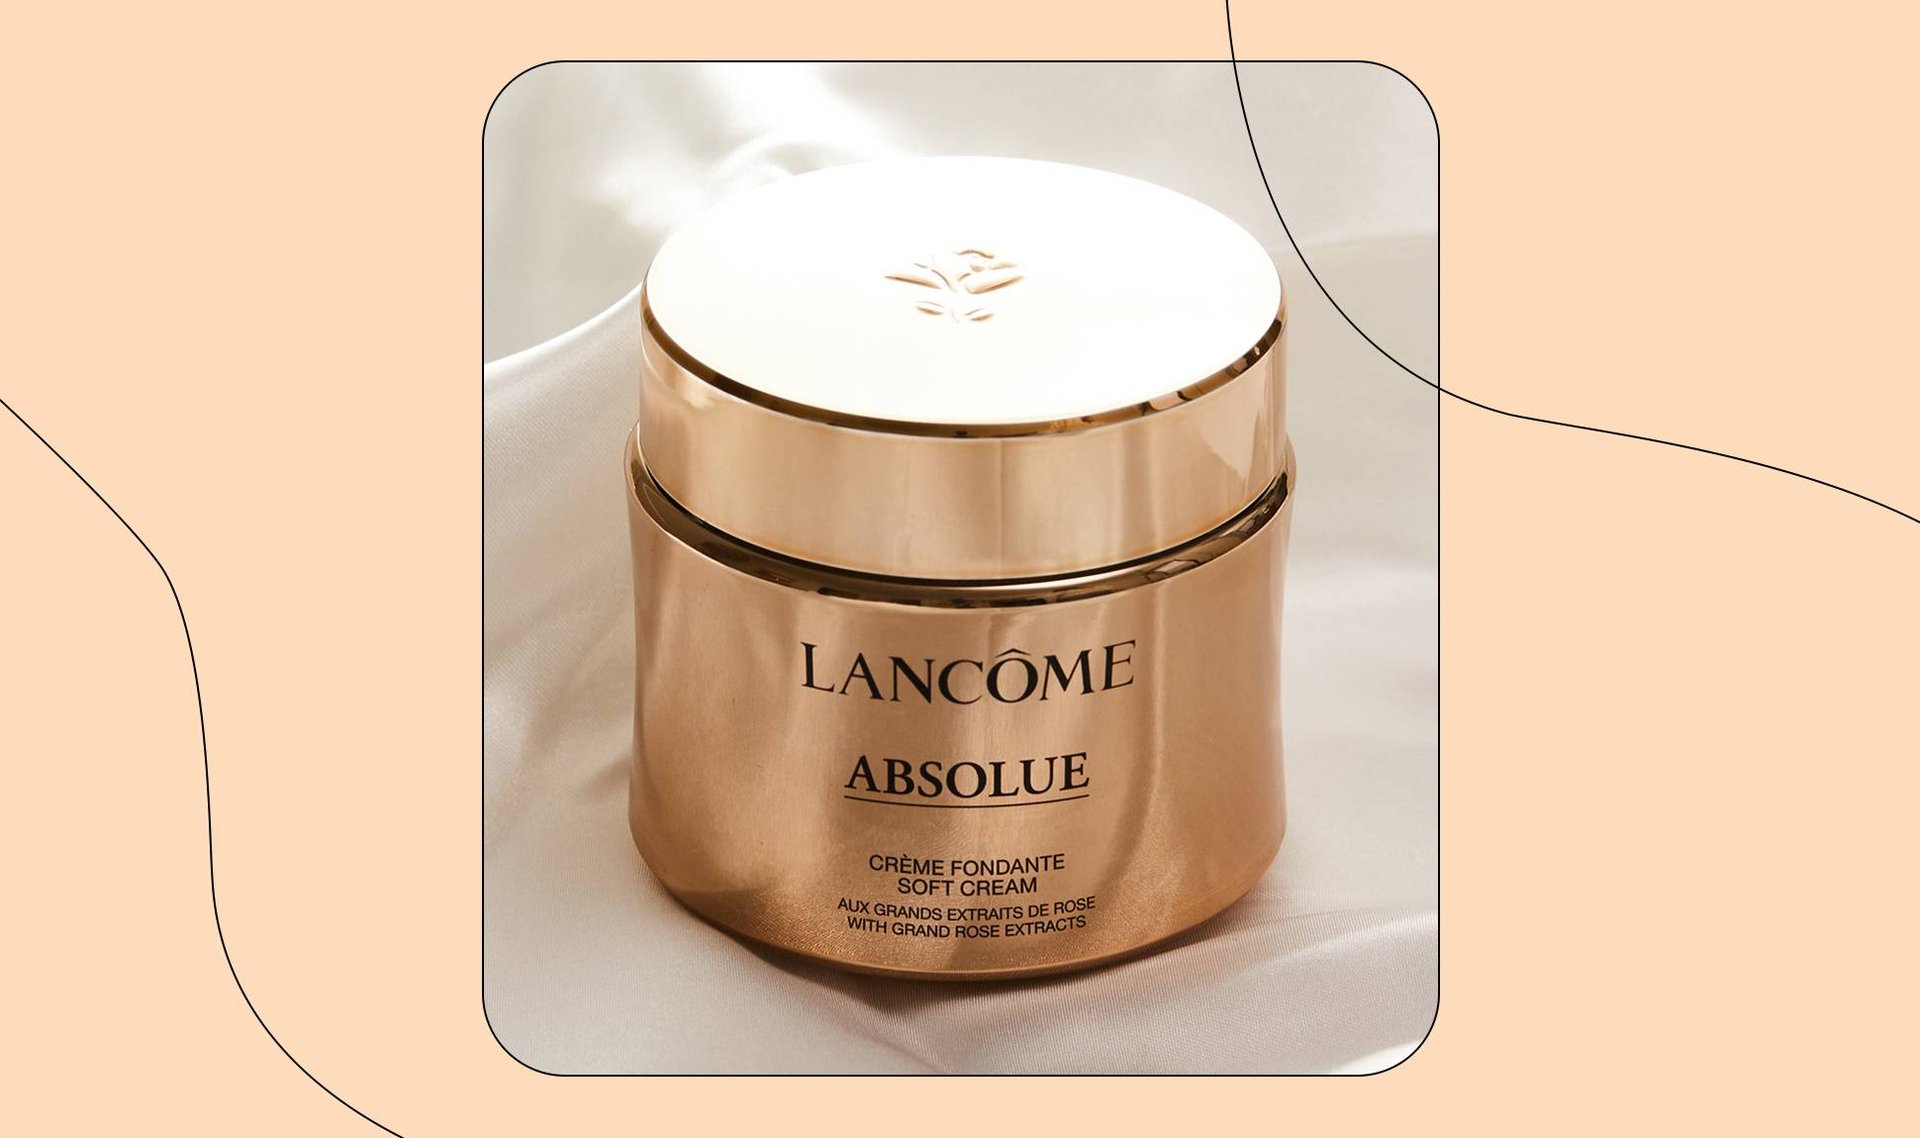 The Lancôme Absolue Revitalizing & Brightening Soft Cream Saved My Chapped Winter Skin